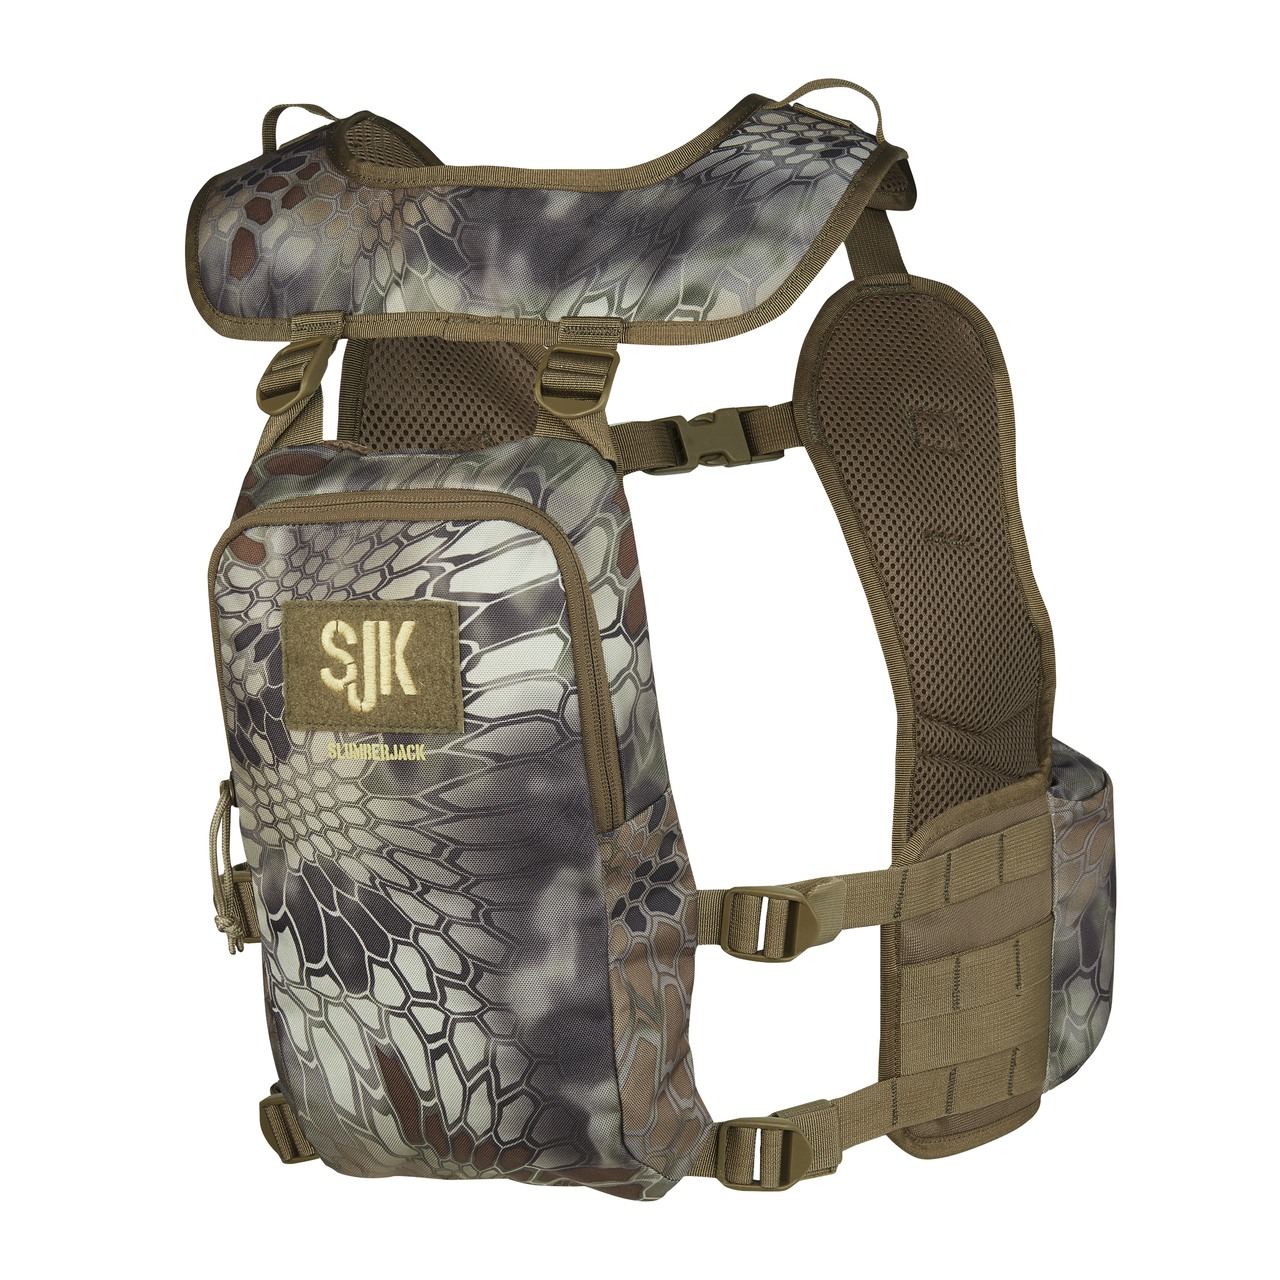 SJK Pursuit Hunting Vest in Kryptek Highlander camouflage. Image of the vest is from the back, displaying one large compartment that is capable of holding up to a 70 ounce reservoir.